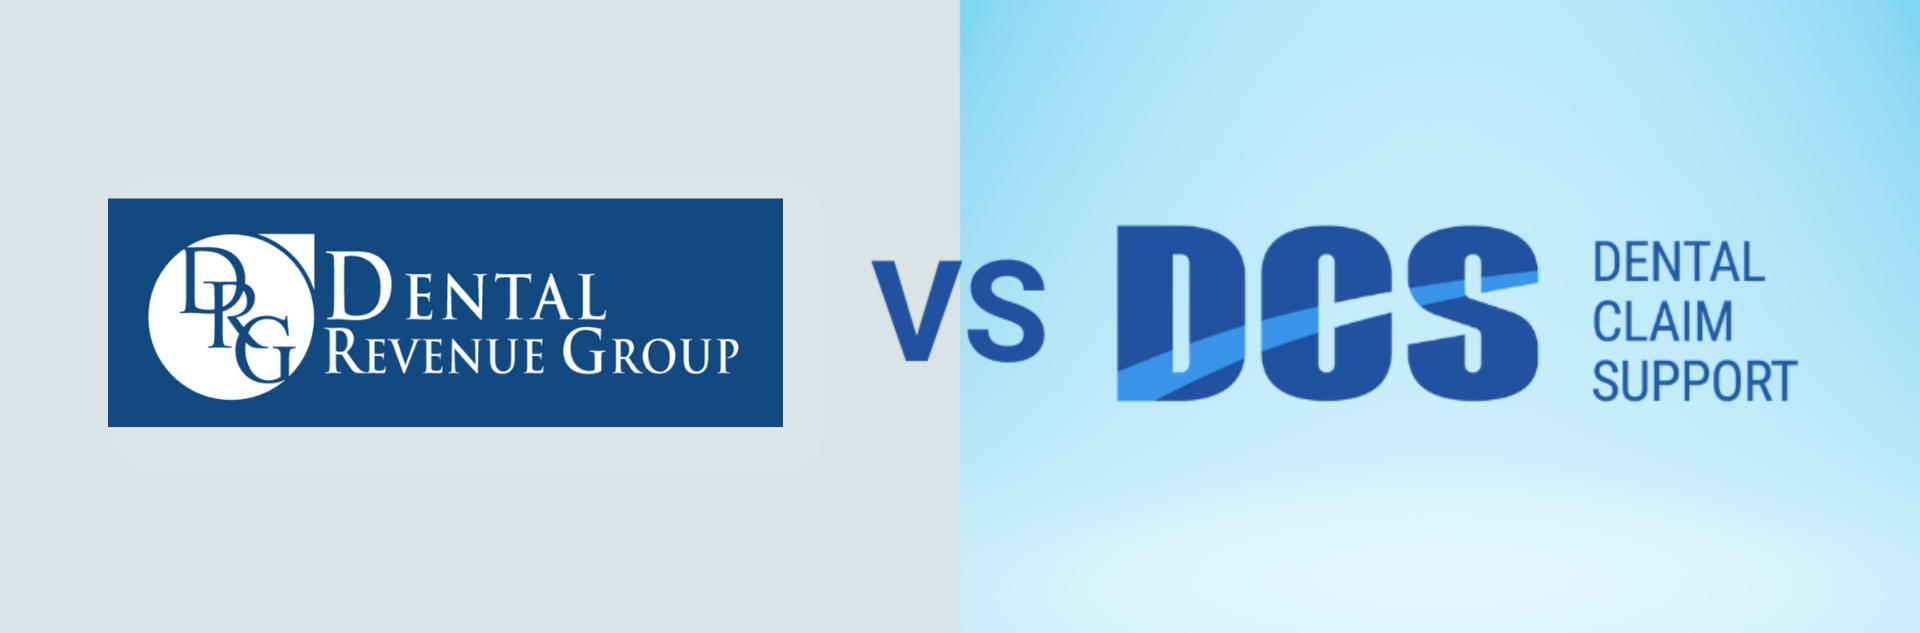 DCS vs Dental Revenue Group: Let's compare two top RCM companies [5 of 10]